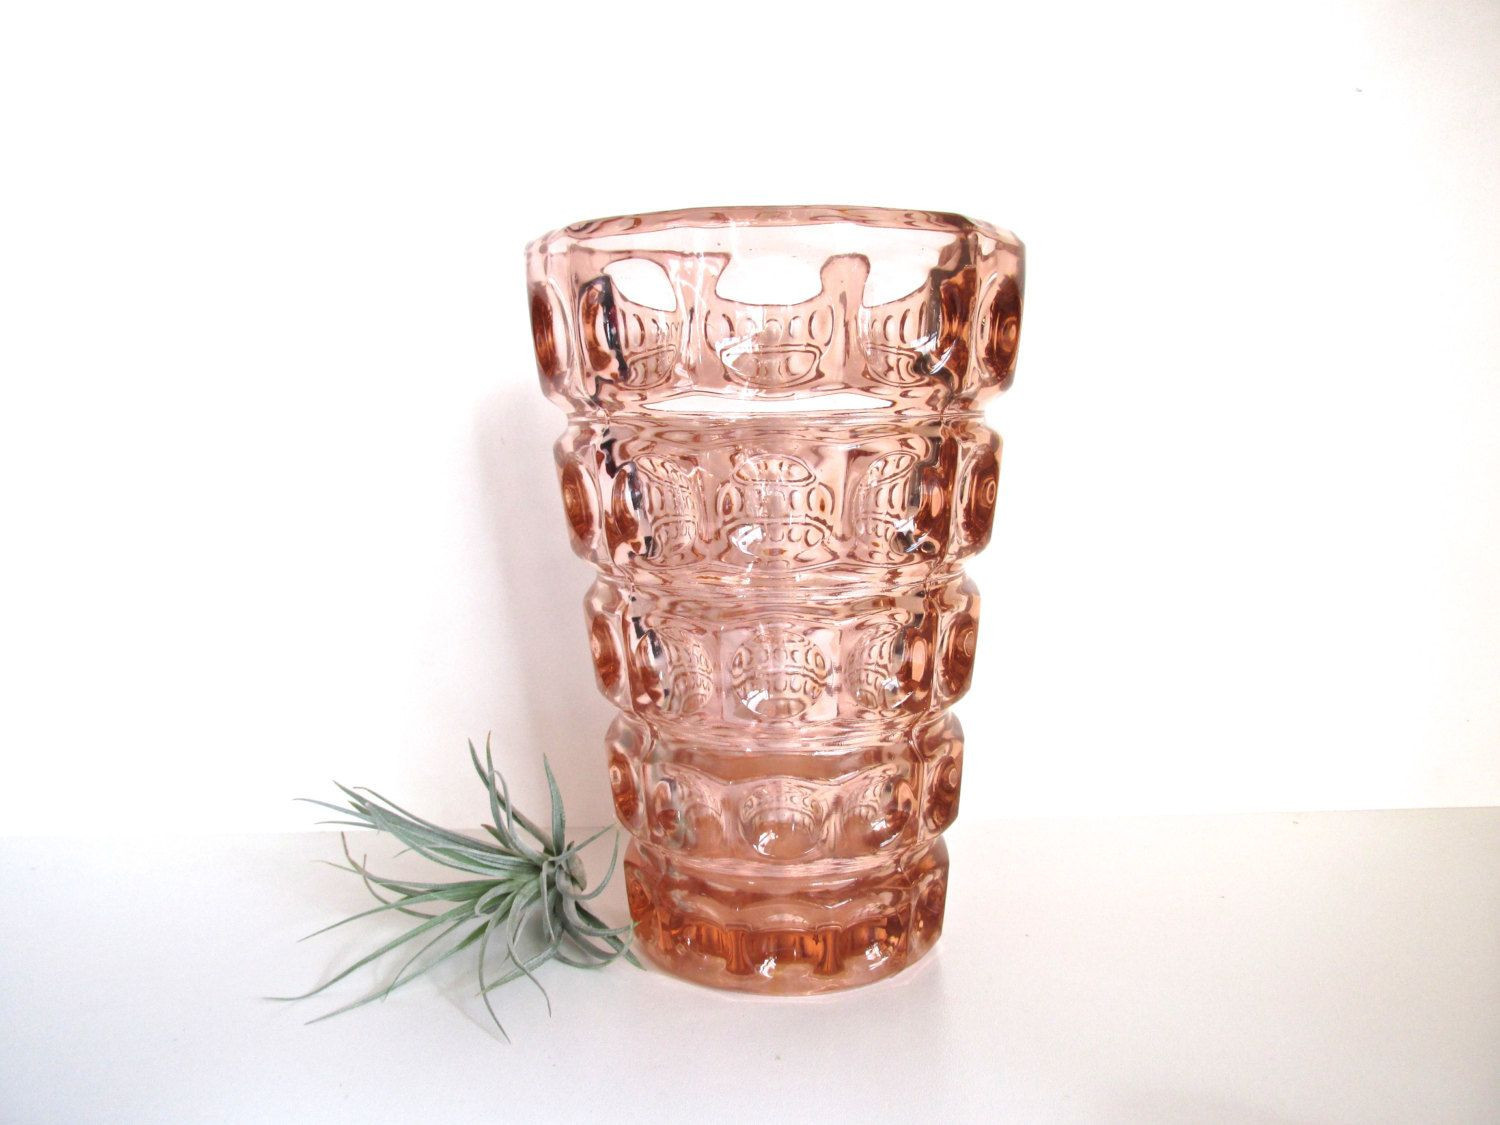 30 attractive Glass Pitcher Vase 2022 free download glass pitcher vase of 17 new large pink vase bogekompresorturkiye com with large pink vase newest reserve listing for j sklo union pink glass vase czech